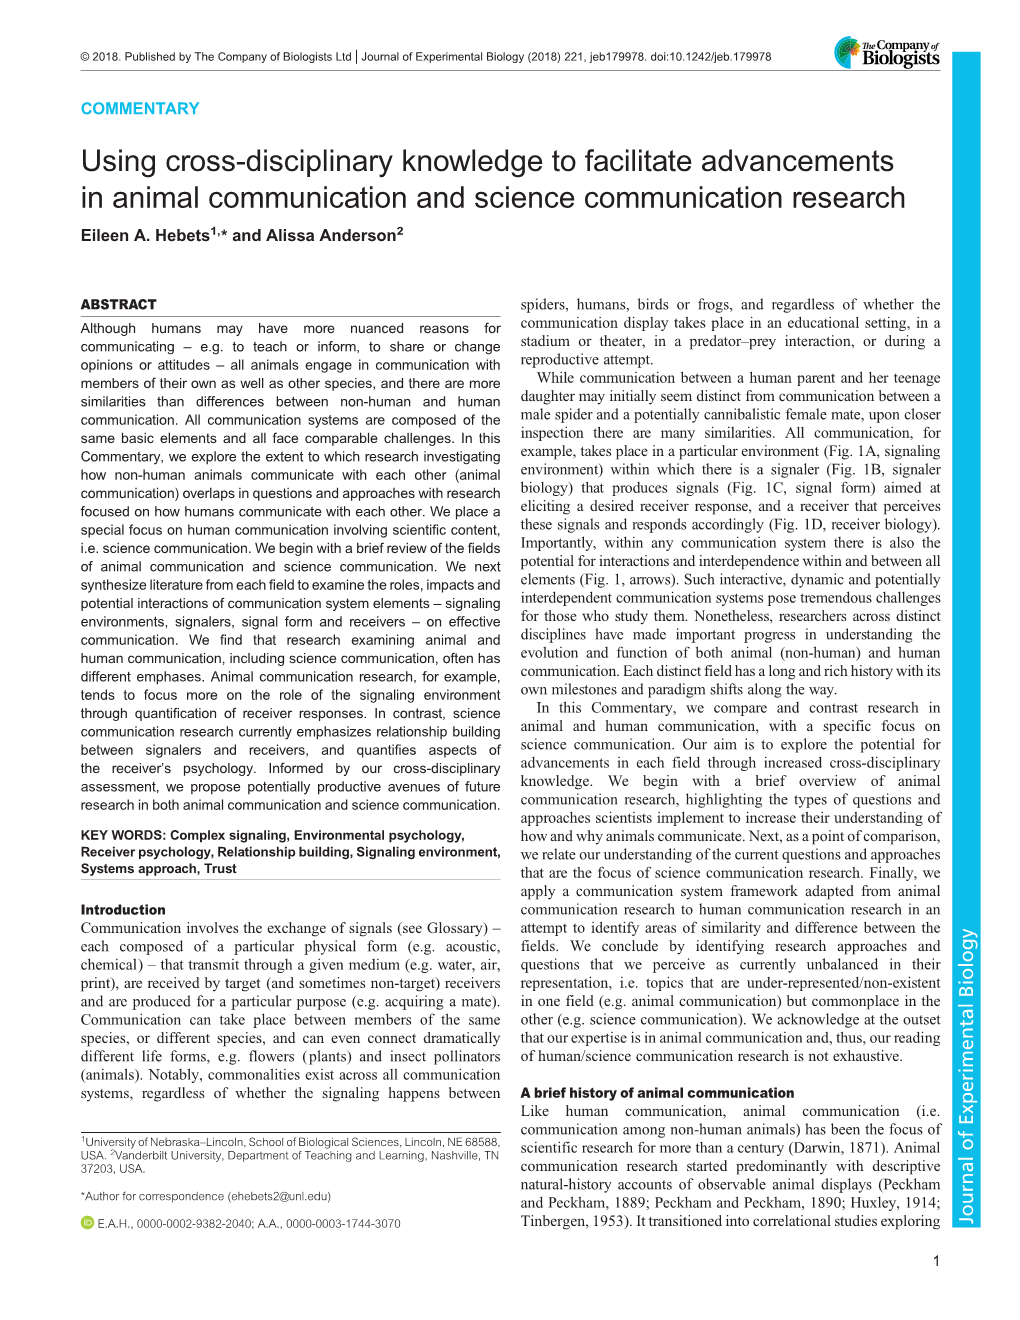 Using Cross-Disciplinary Knowledge to Facilitate Advancements in Animal Communication and Science Communication Research Eileen A